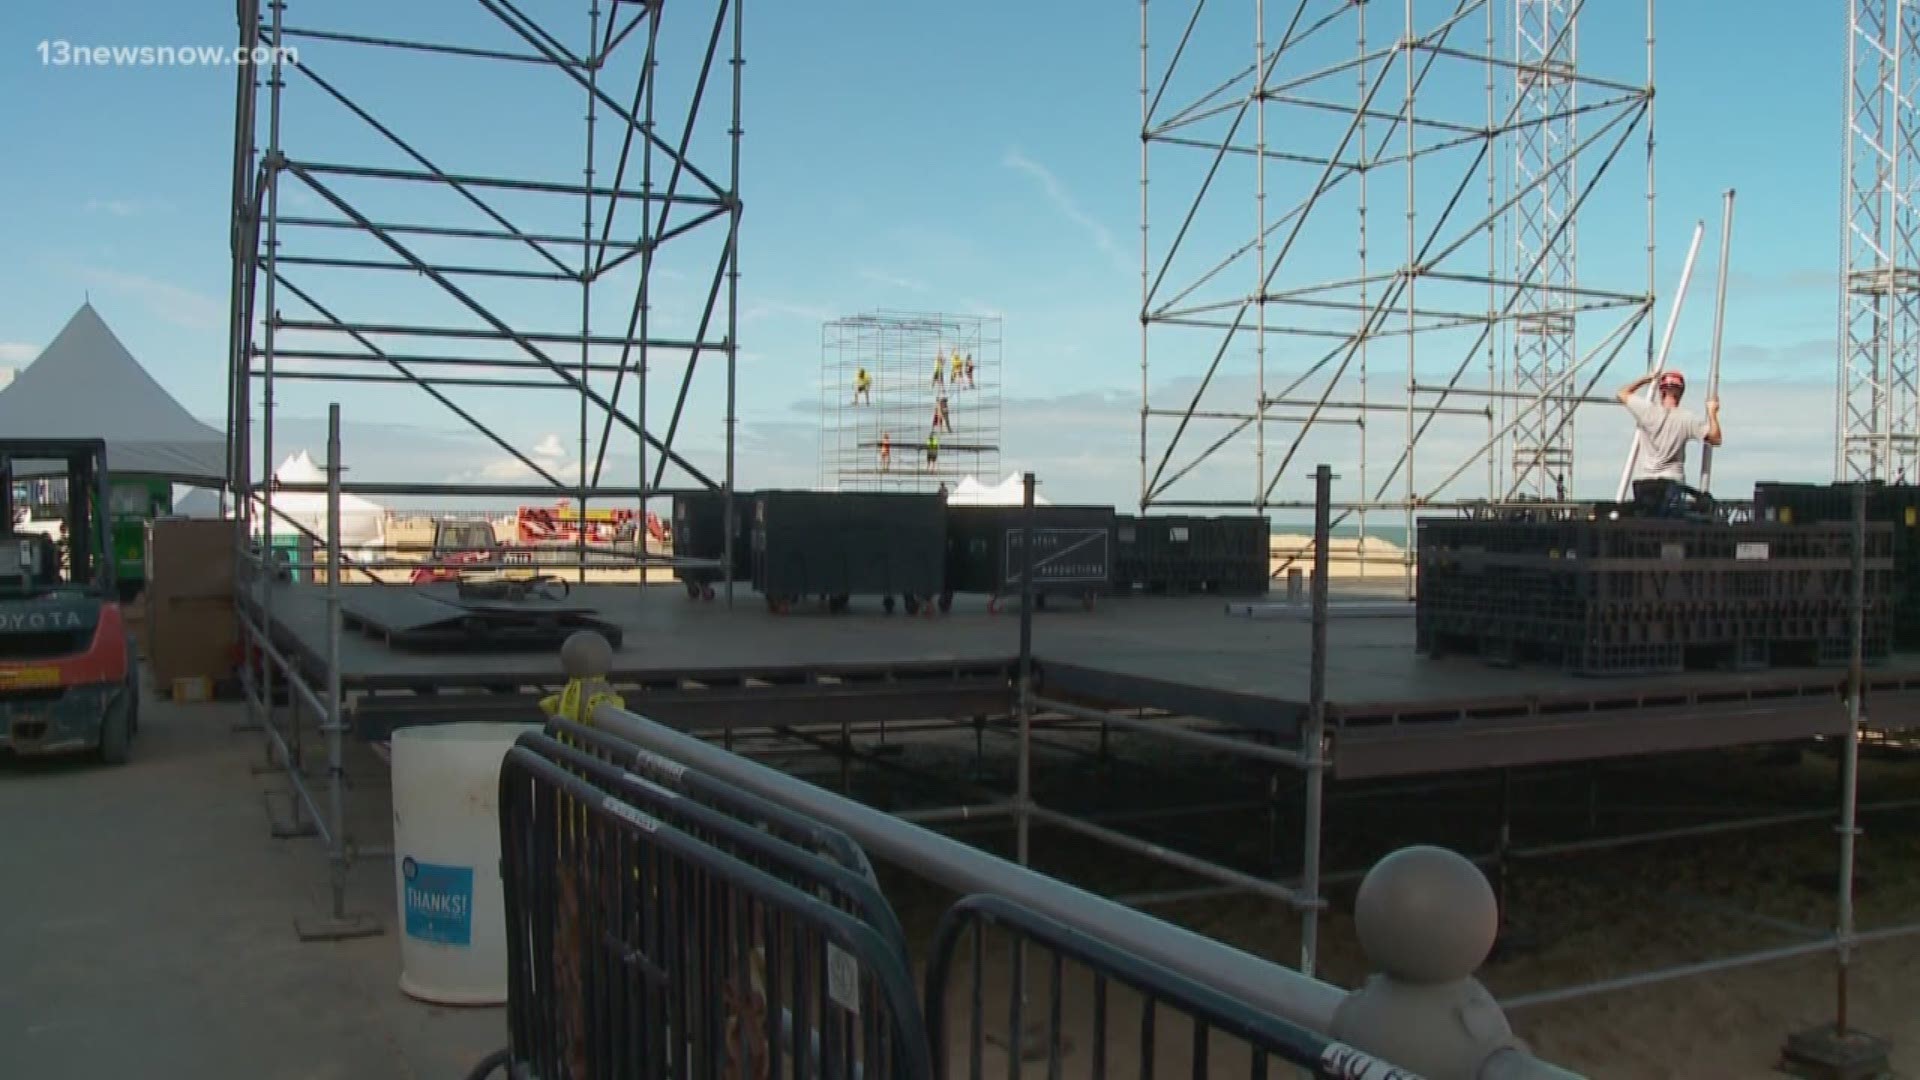 The American Music Festival is coming to the Oceanfront. The main stage, on the beach, is under construction. The three-day event is expected to bring 30,000 people to the city.